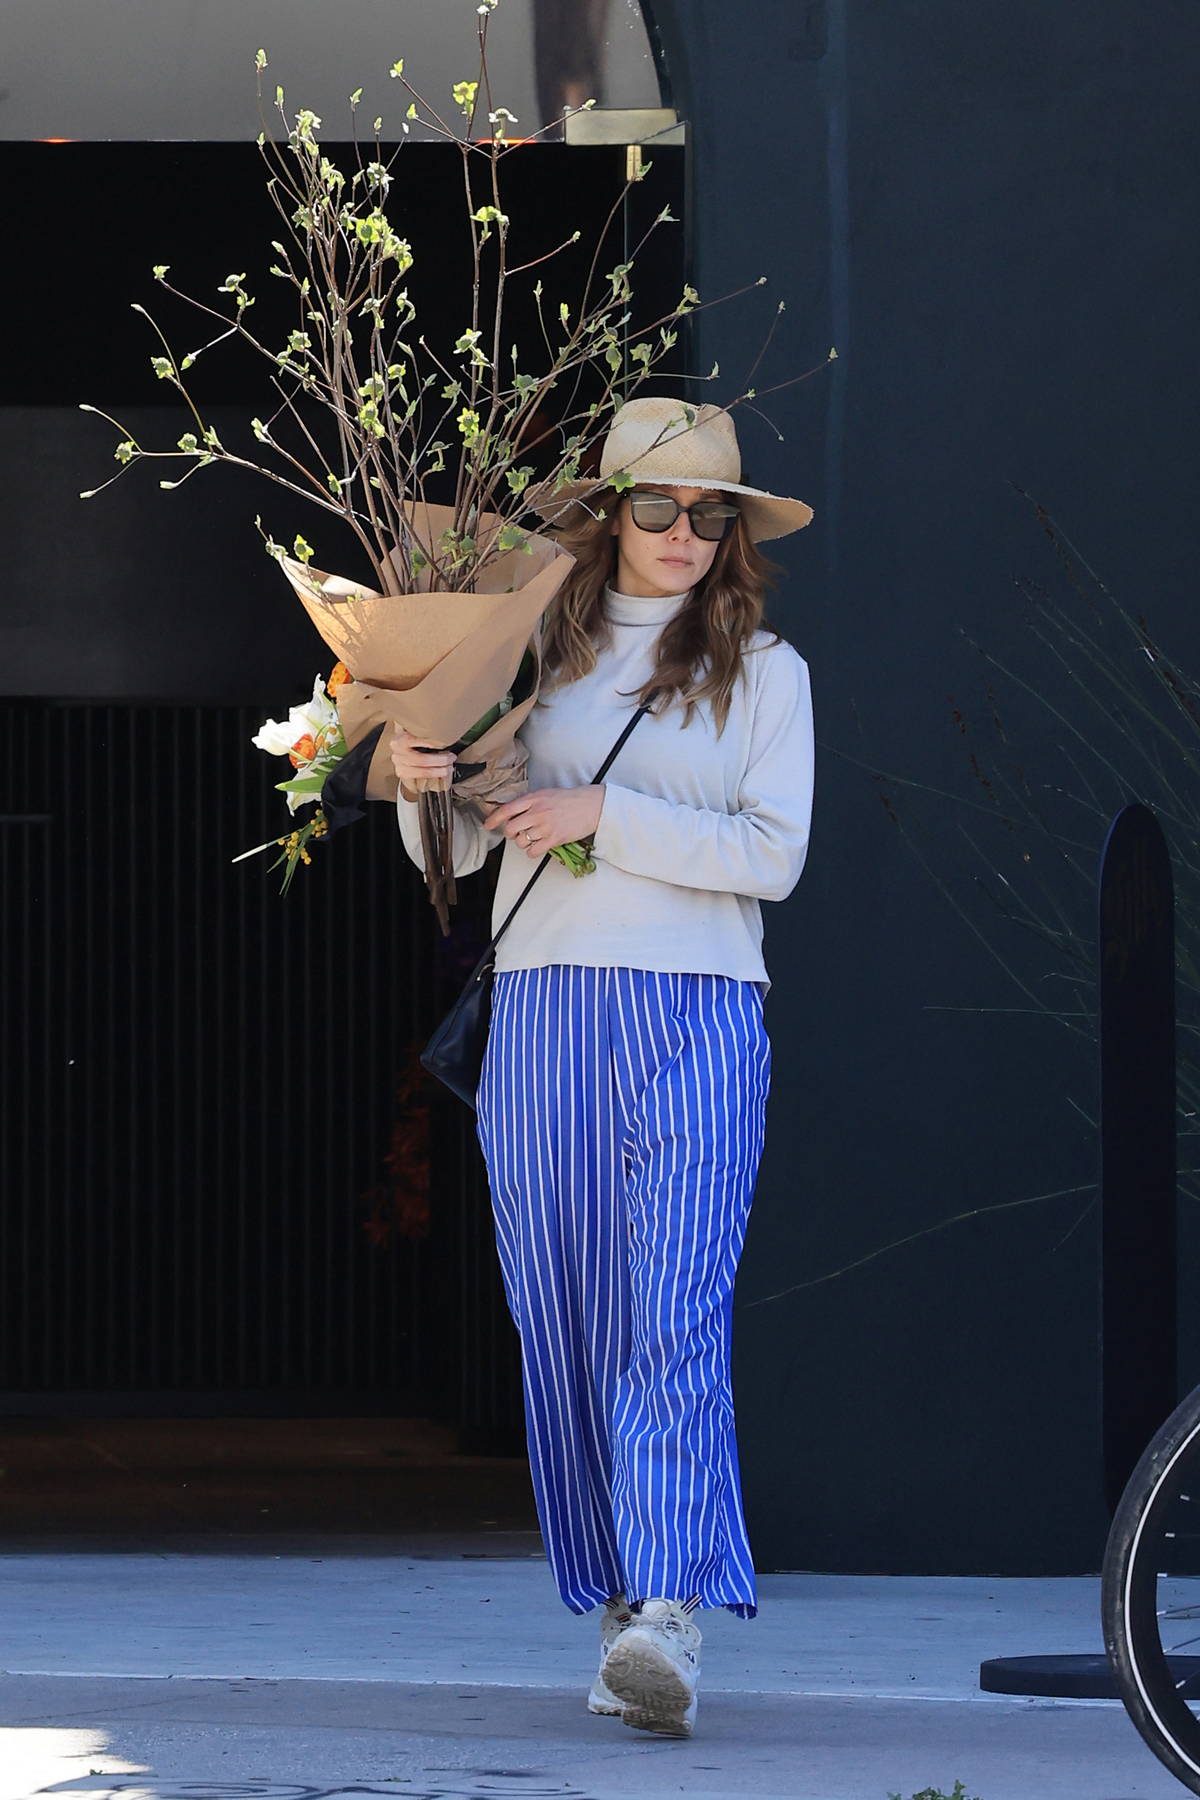 Elizabeth-Olsen-shows-off-her-chic-summer-style-while-visiting-a-florist-in-Los-Angeles-160424_8.jpg